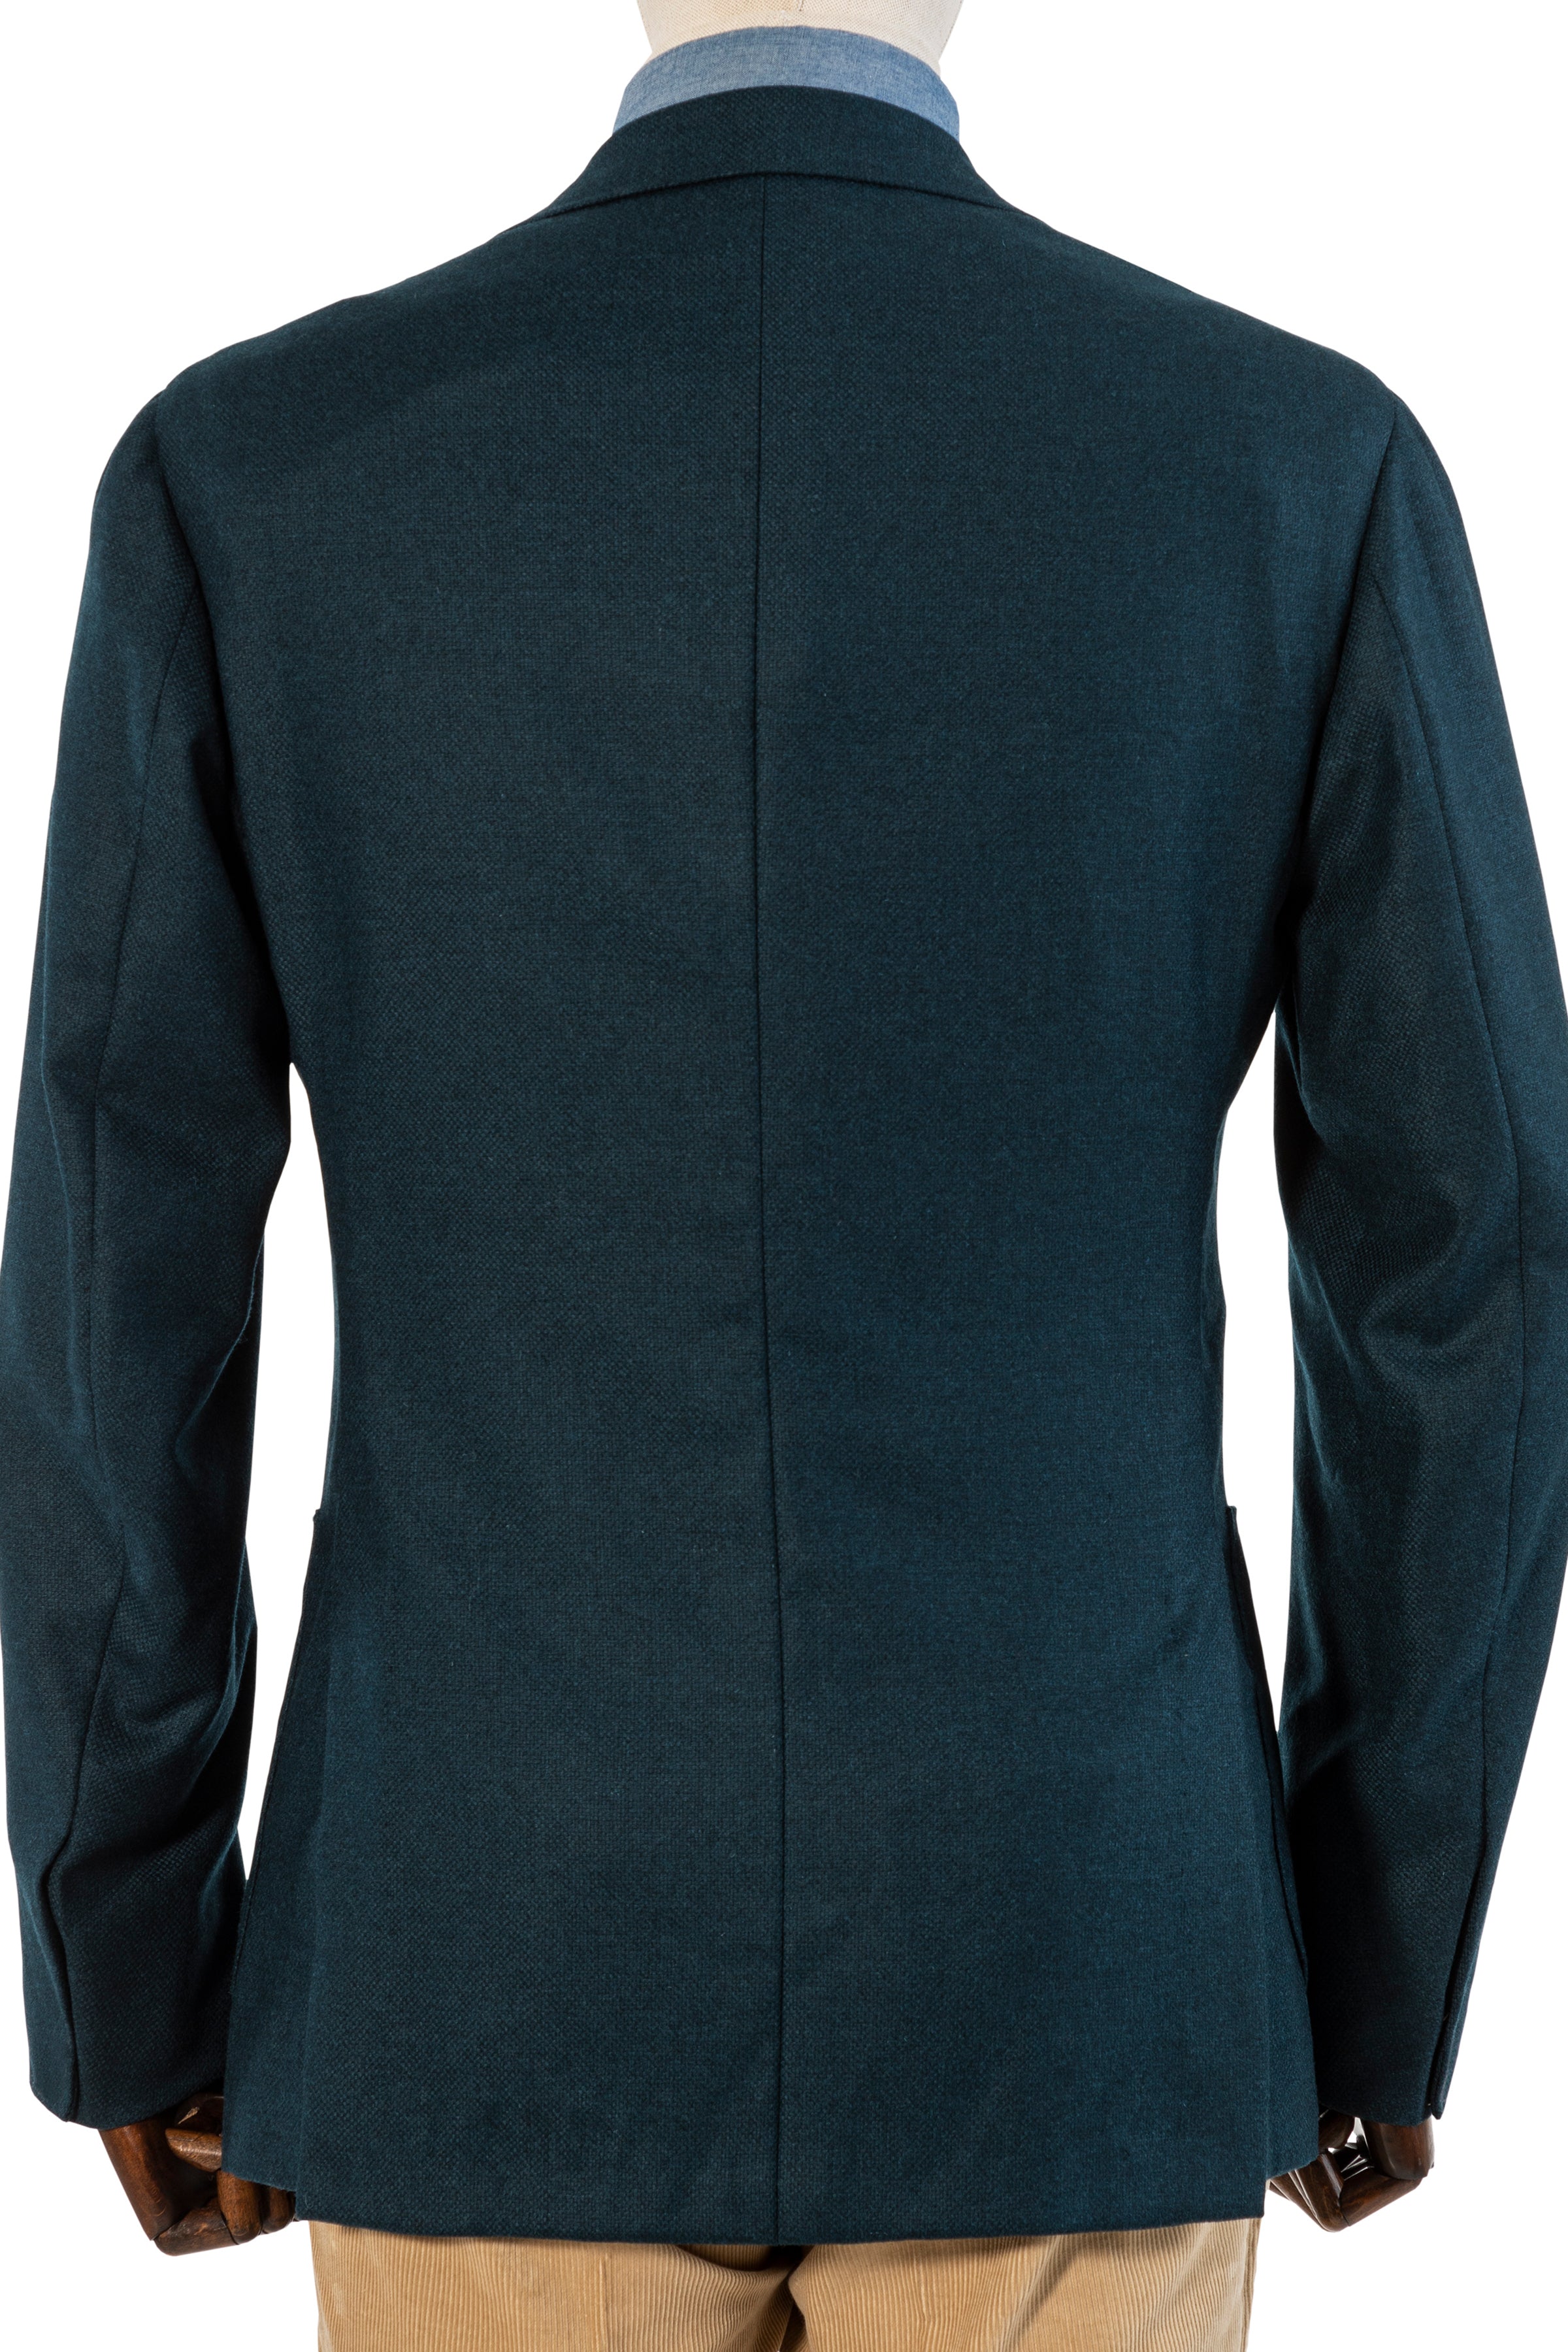 The Armoury by Ring Jacket Model 3 Blue Green Netherton H Wool Sport Coat